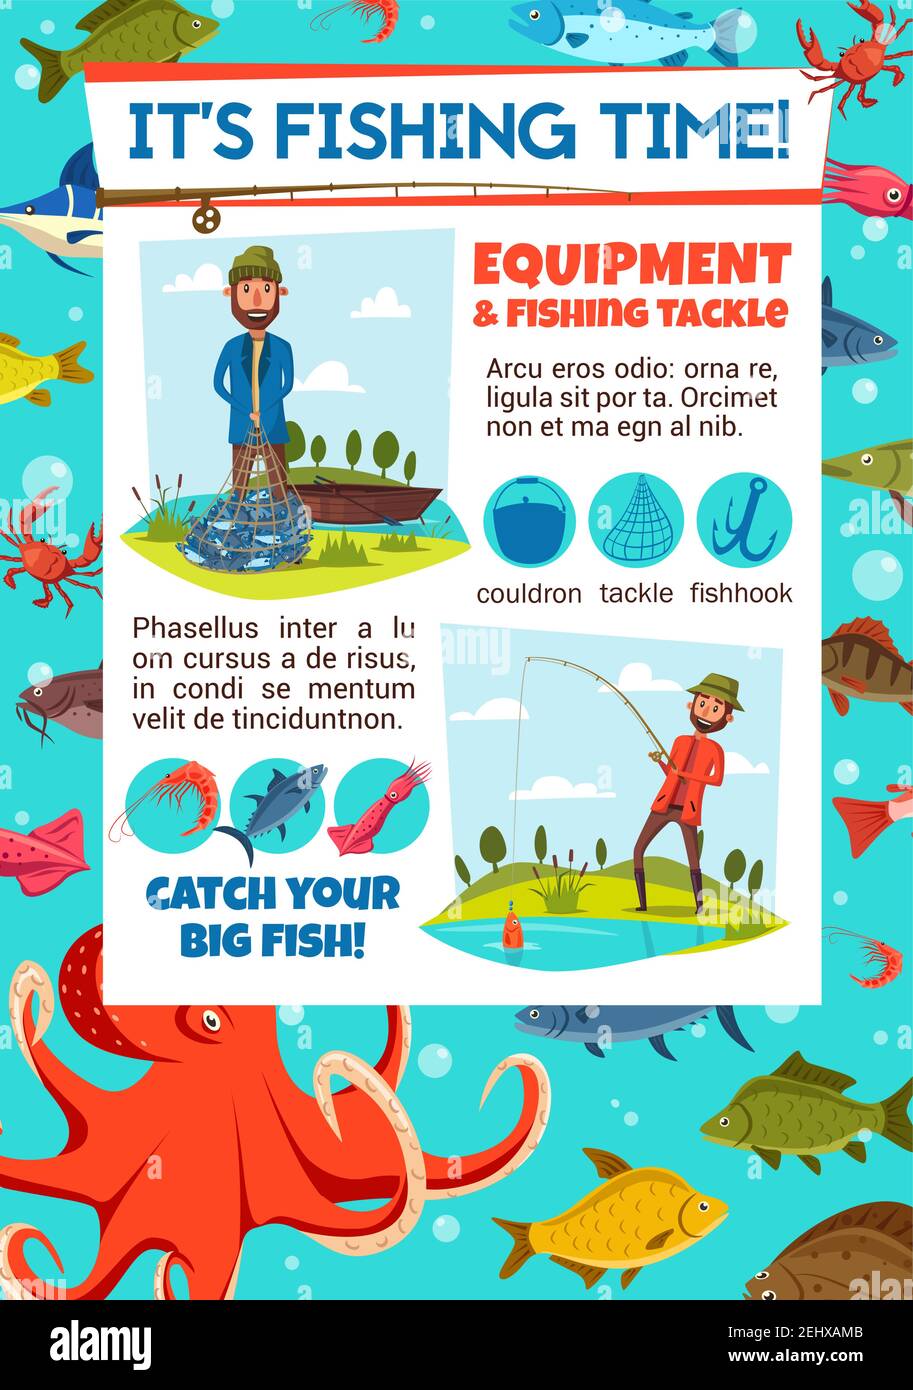 Fisherman and equipment or tackle on fishing tournament invitation. Sea fishing poster with fisher holding net or rod. Cauldron and hook, shrimp and s Stock Vector